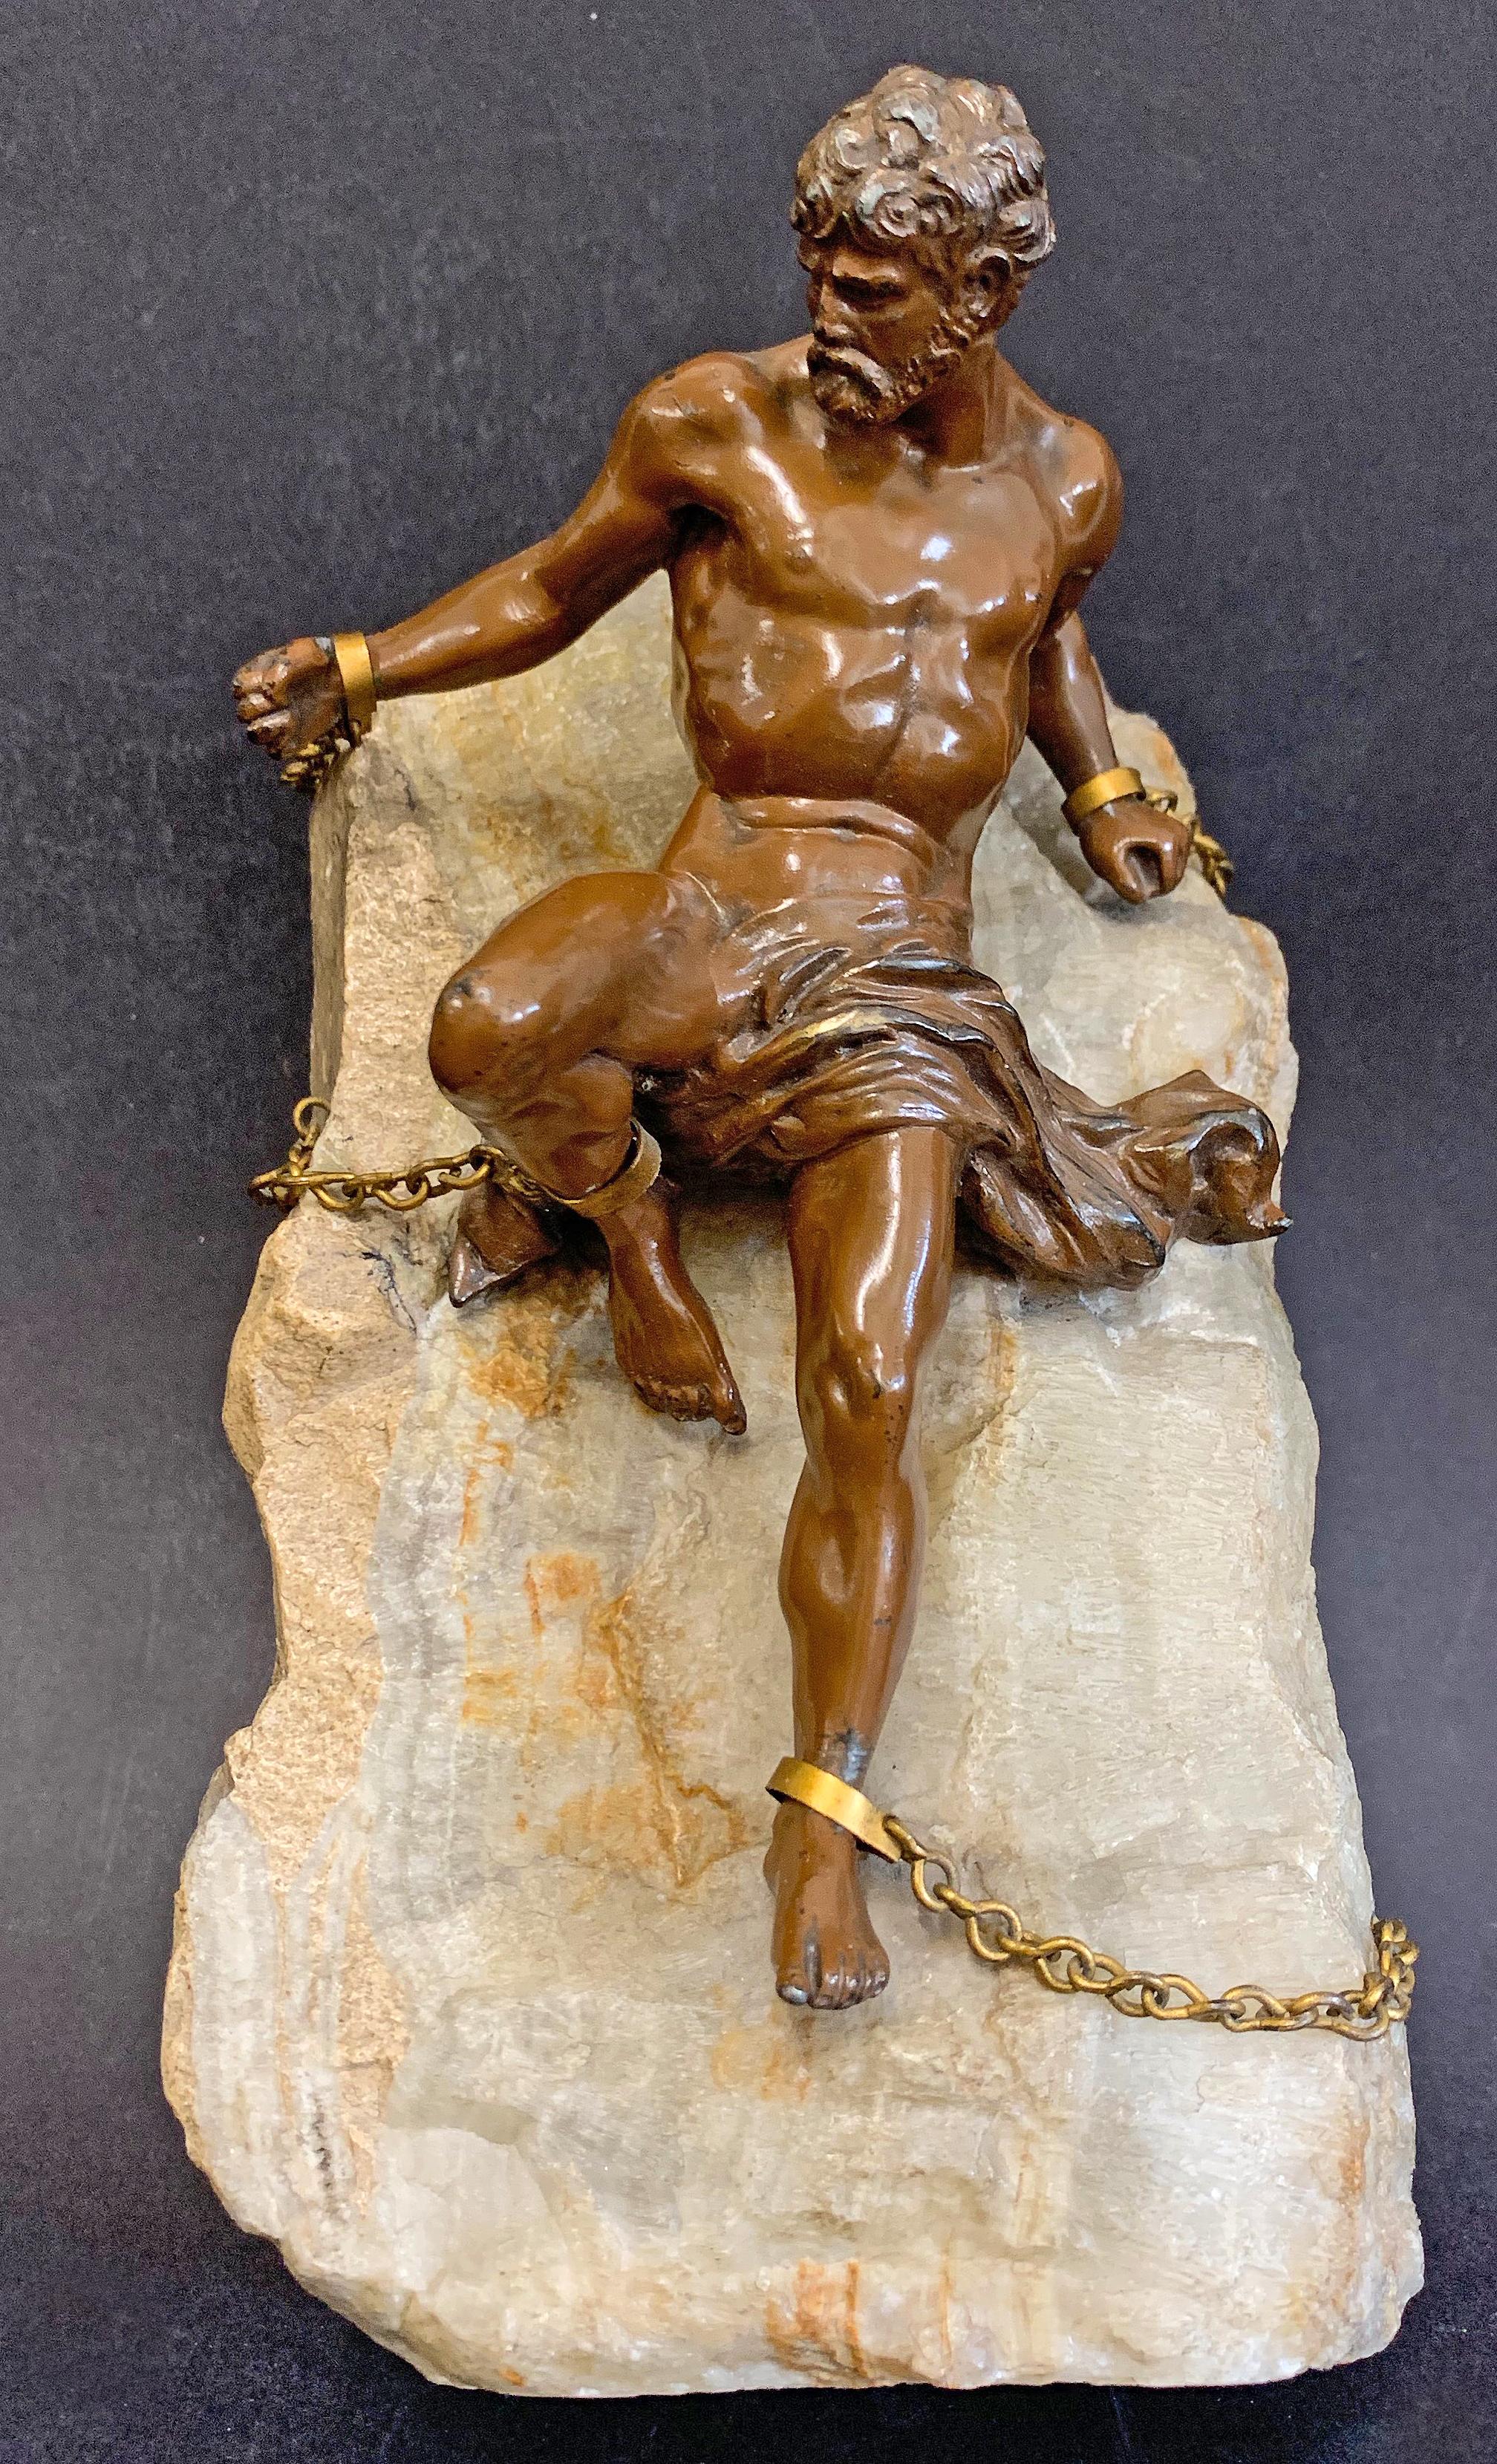 Exquisitely detailed and marvellously conceived, this sculpture of a nude Prometheus is unique to our knowledge. Other artists have tended to present this subject in one material, such as bronze or stone, but in this case the artist has presented